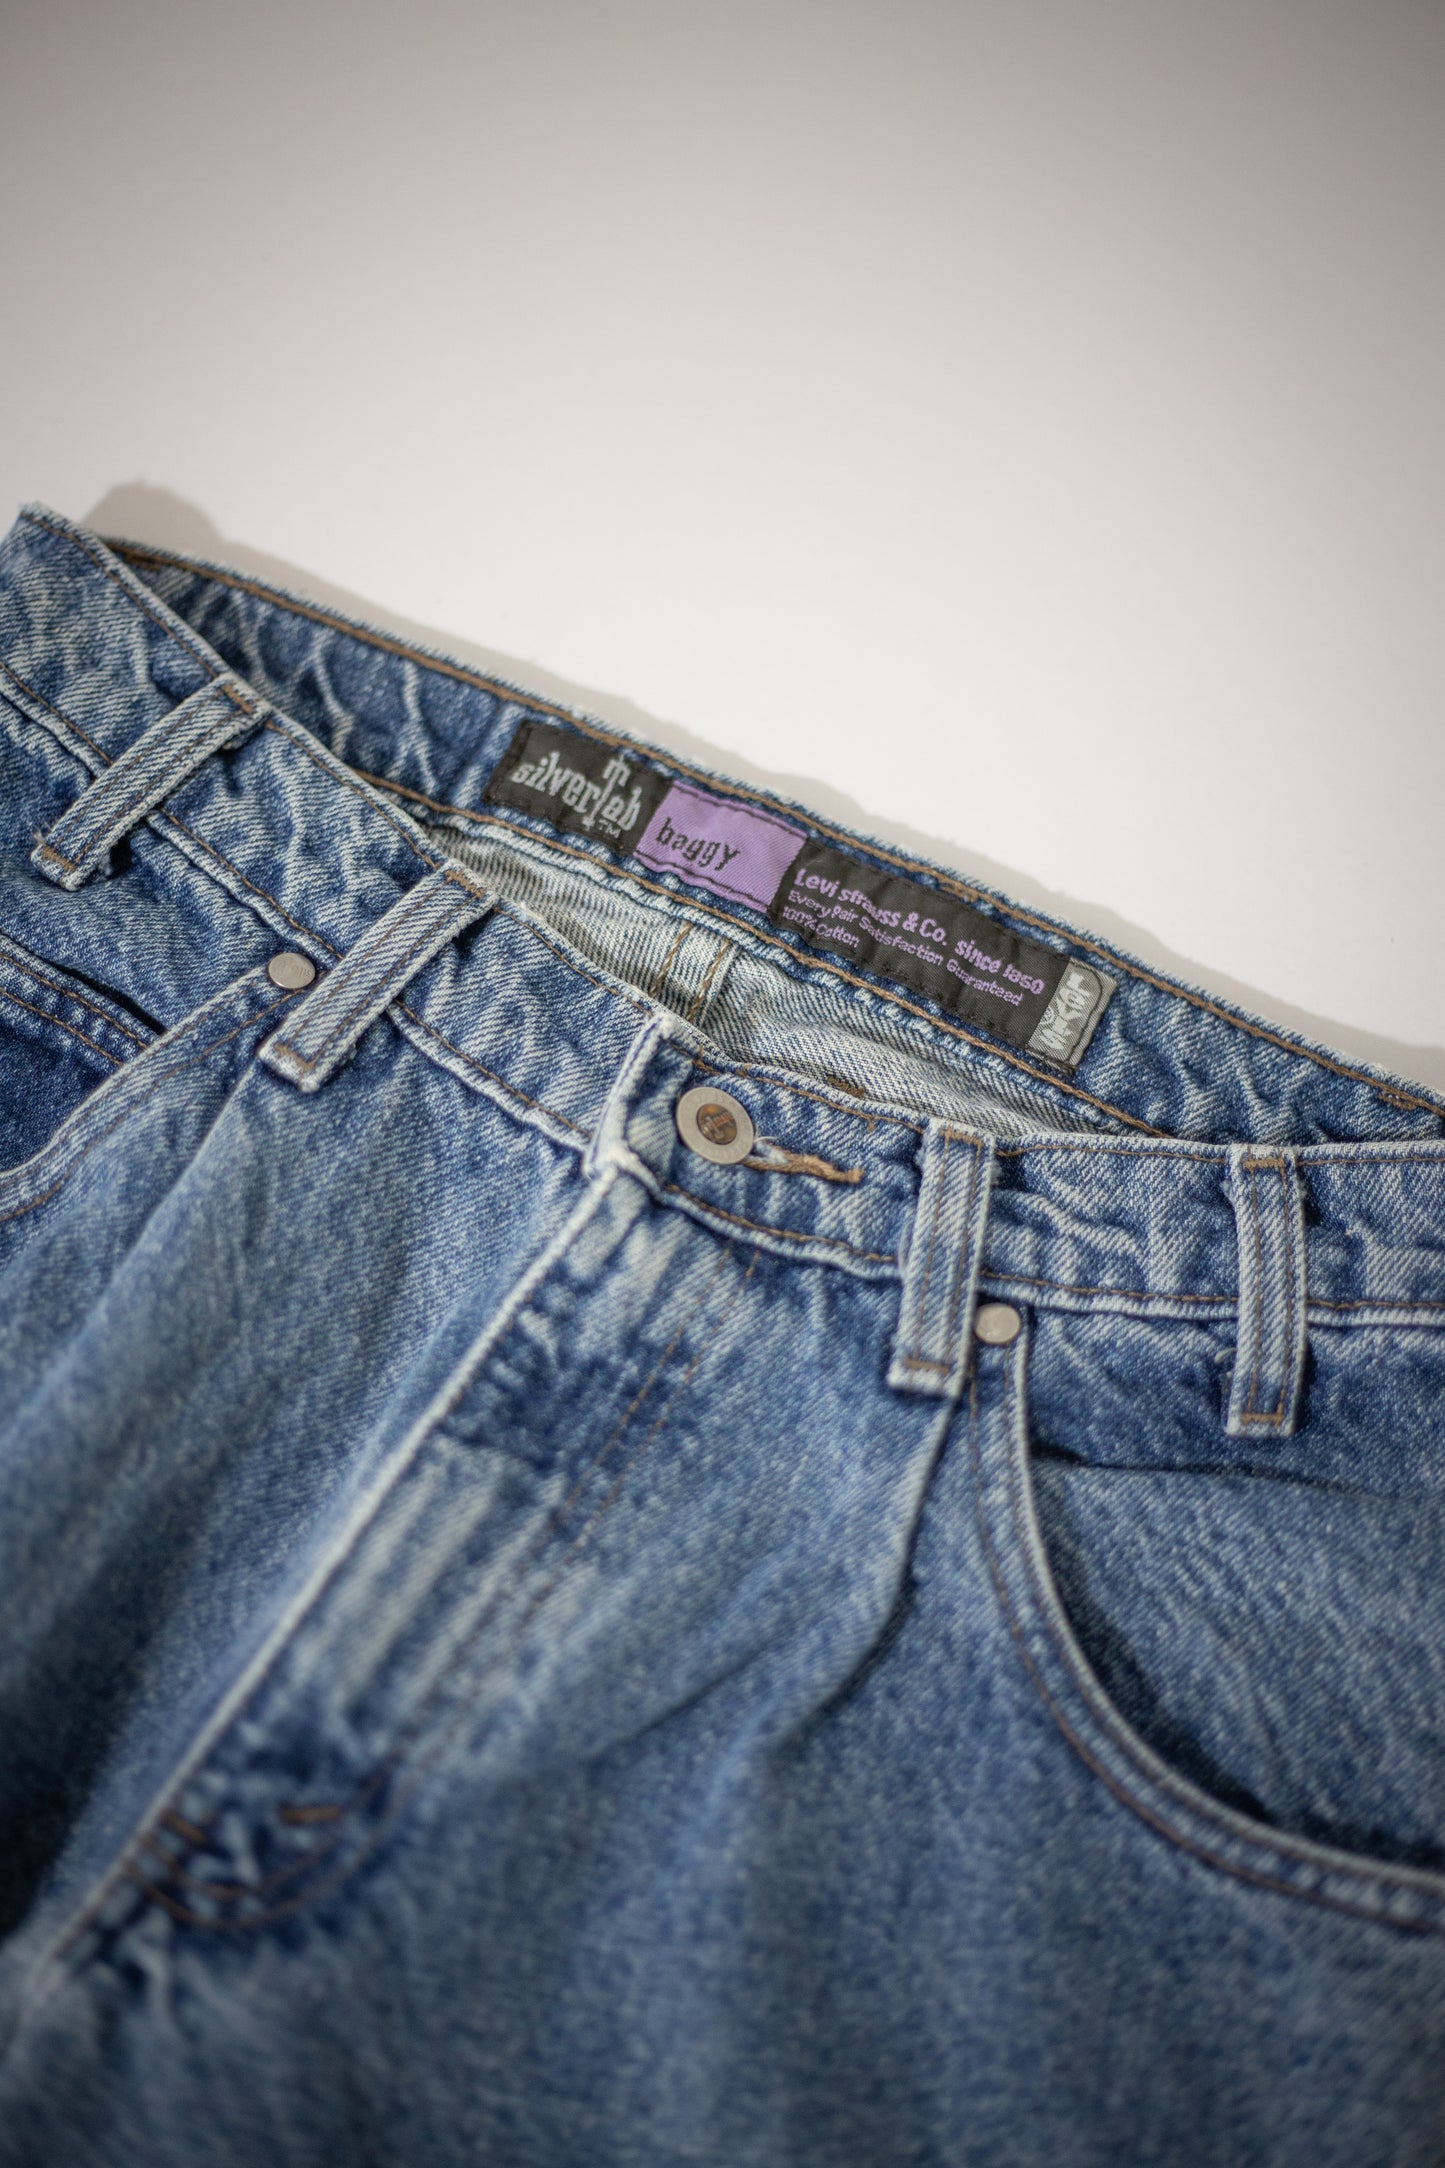 90's Levi's SilverTab Baggy Jeans